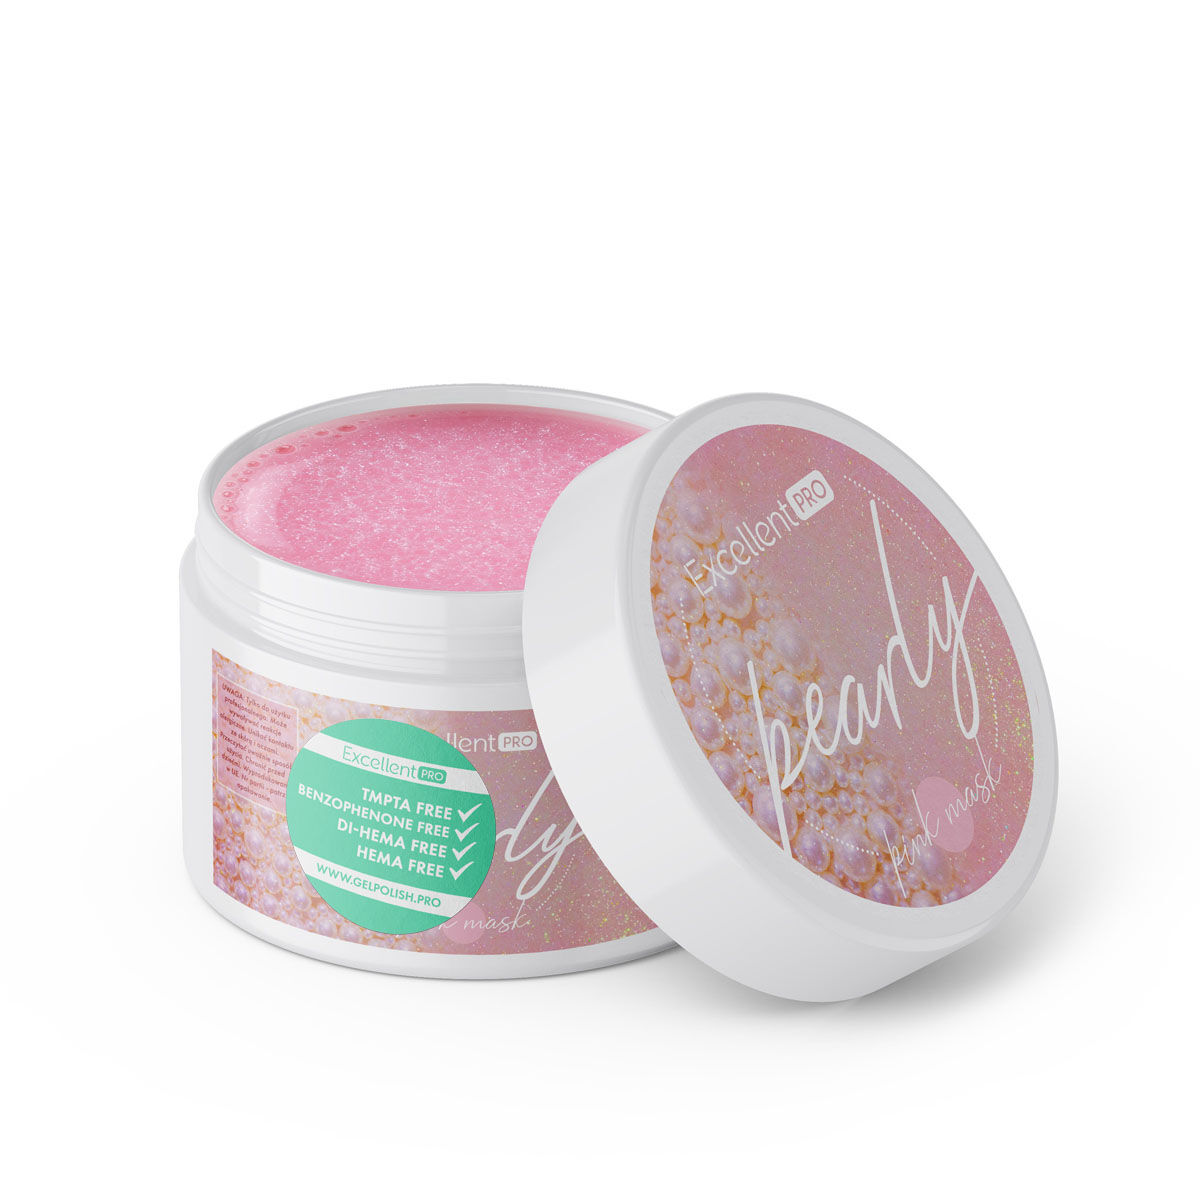 Excellent PRO Pearly Gel - Pink Mask